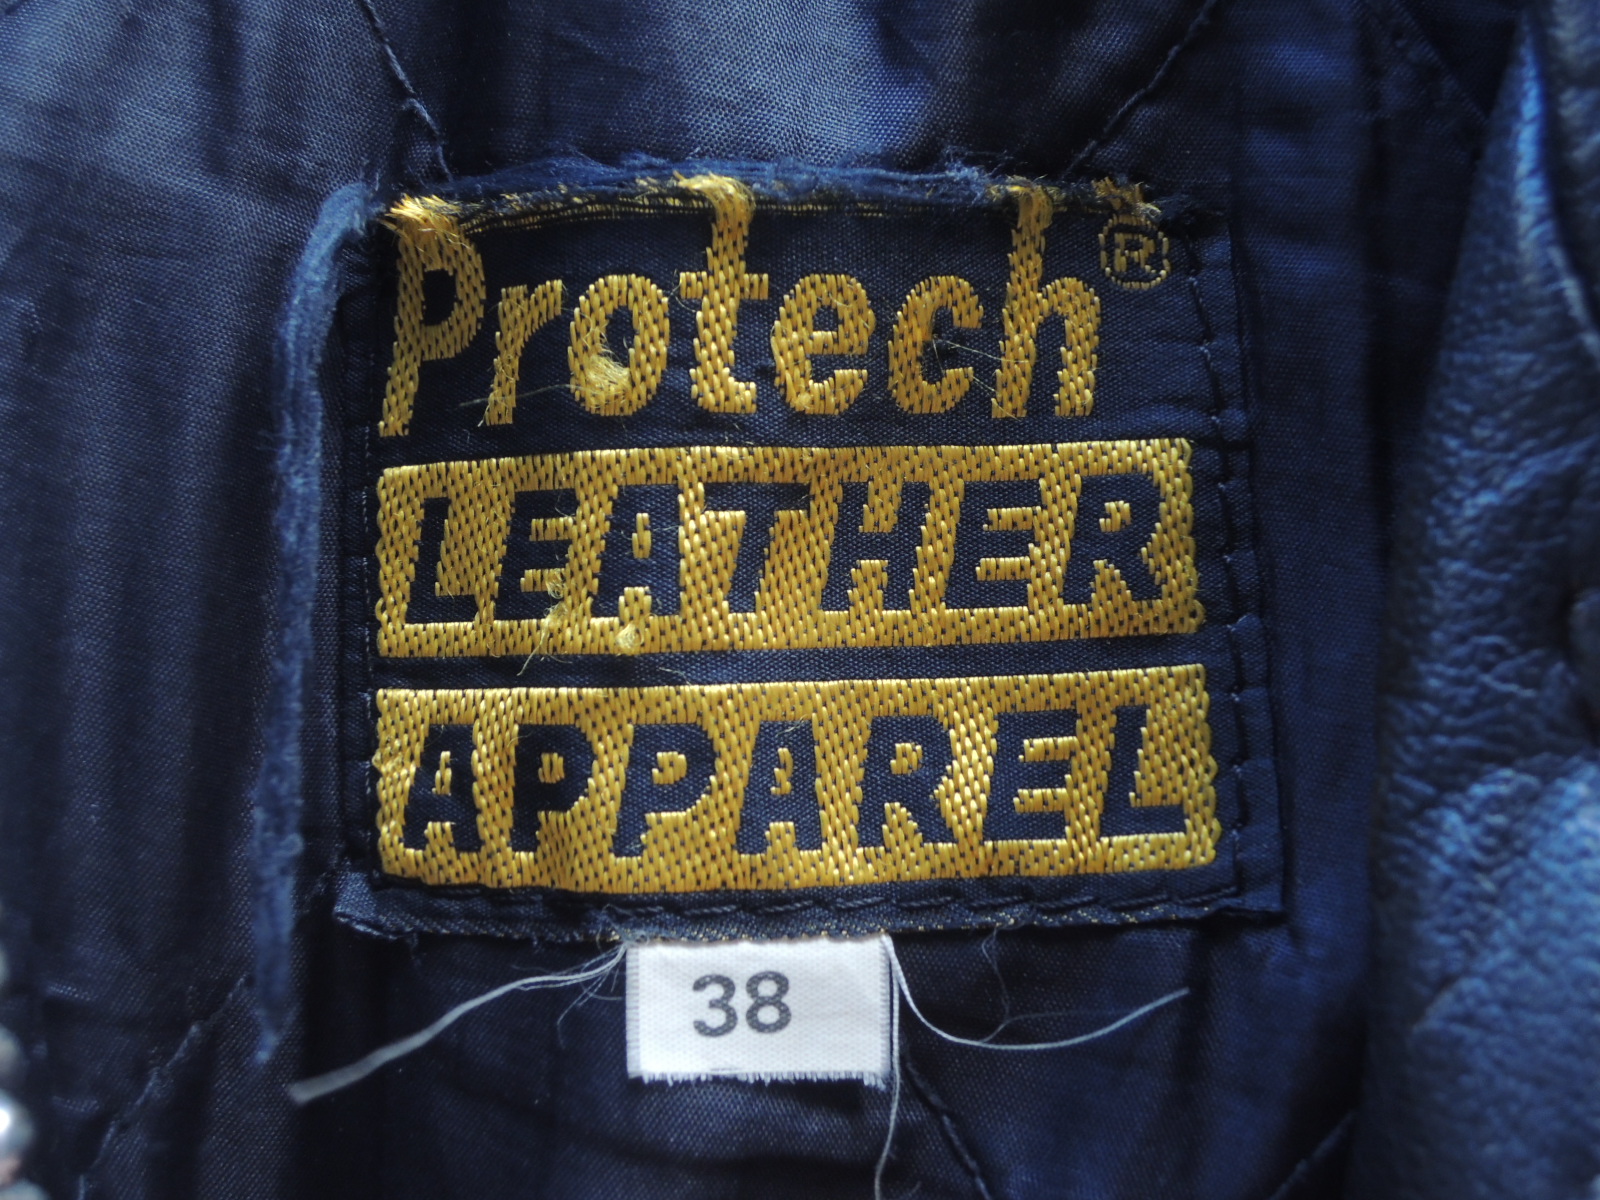 70 ～ 80's Protech LEATHER APPAREL riders jacket: container